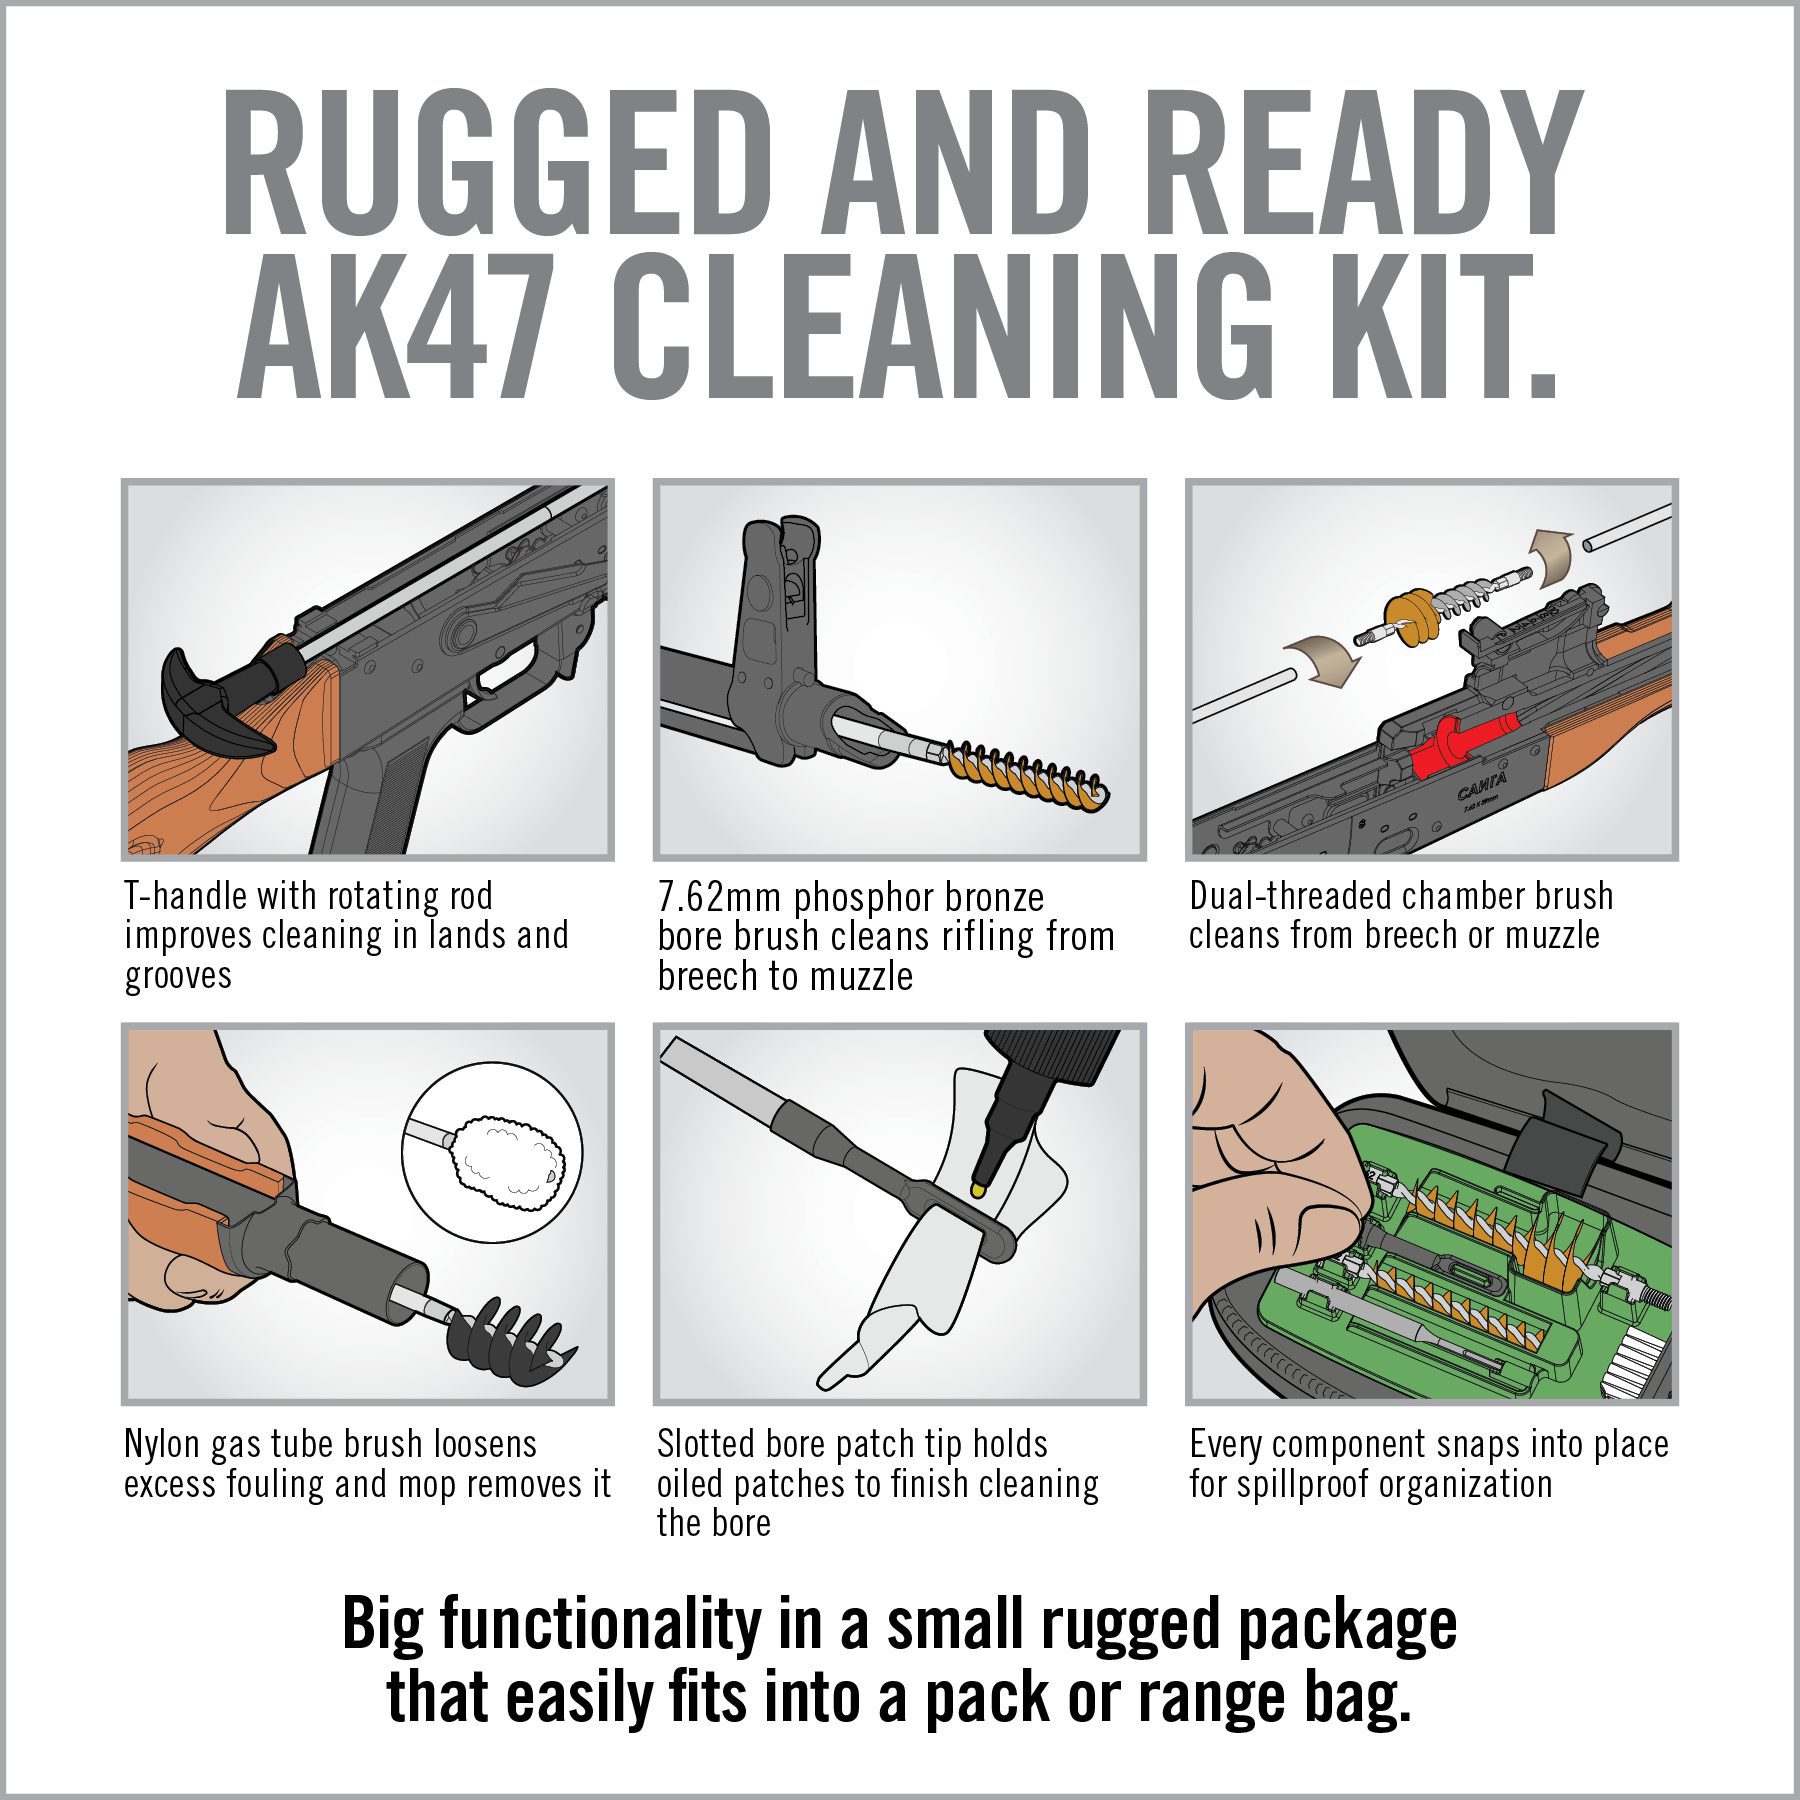 instructions on how to use the rugged and ready ak7 cleaning kit